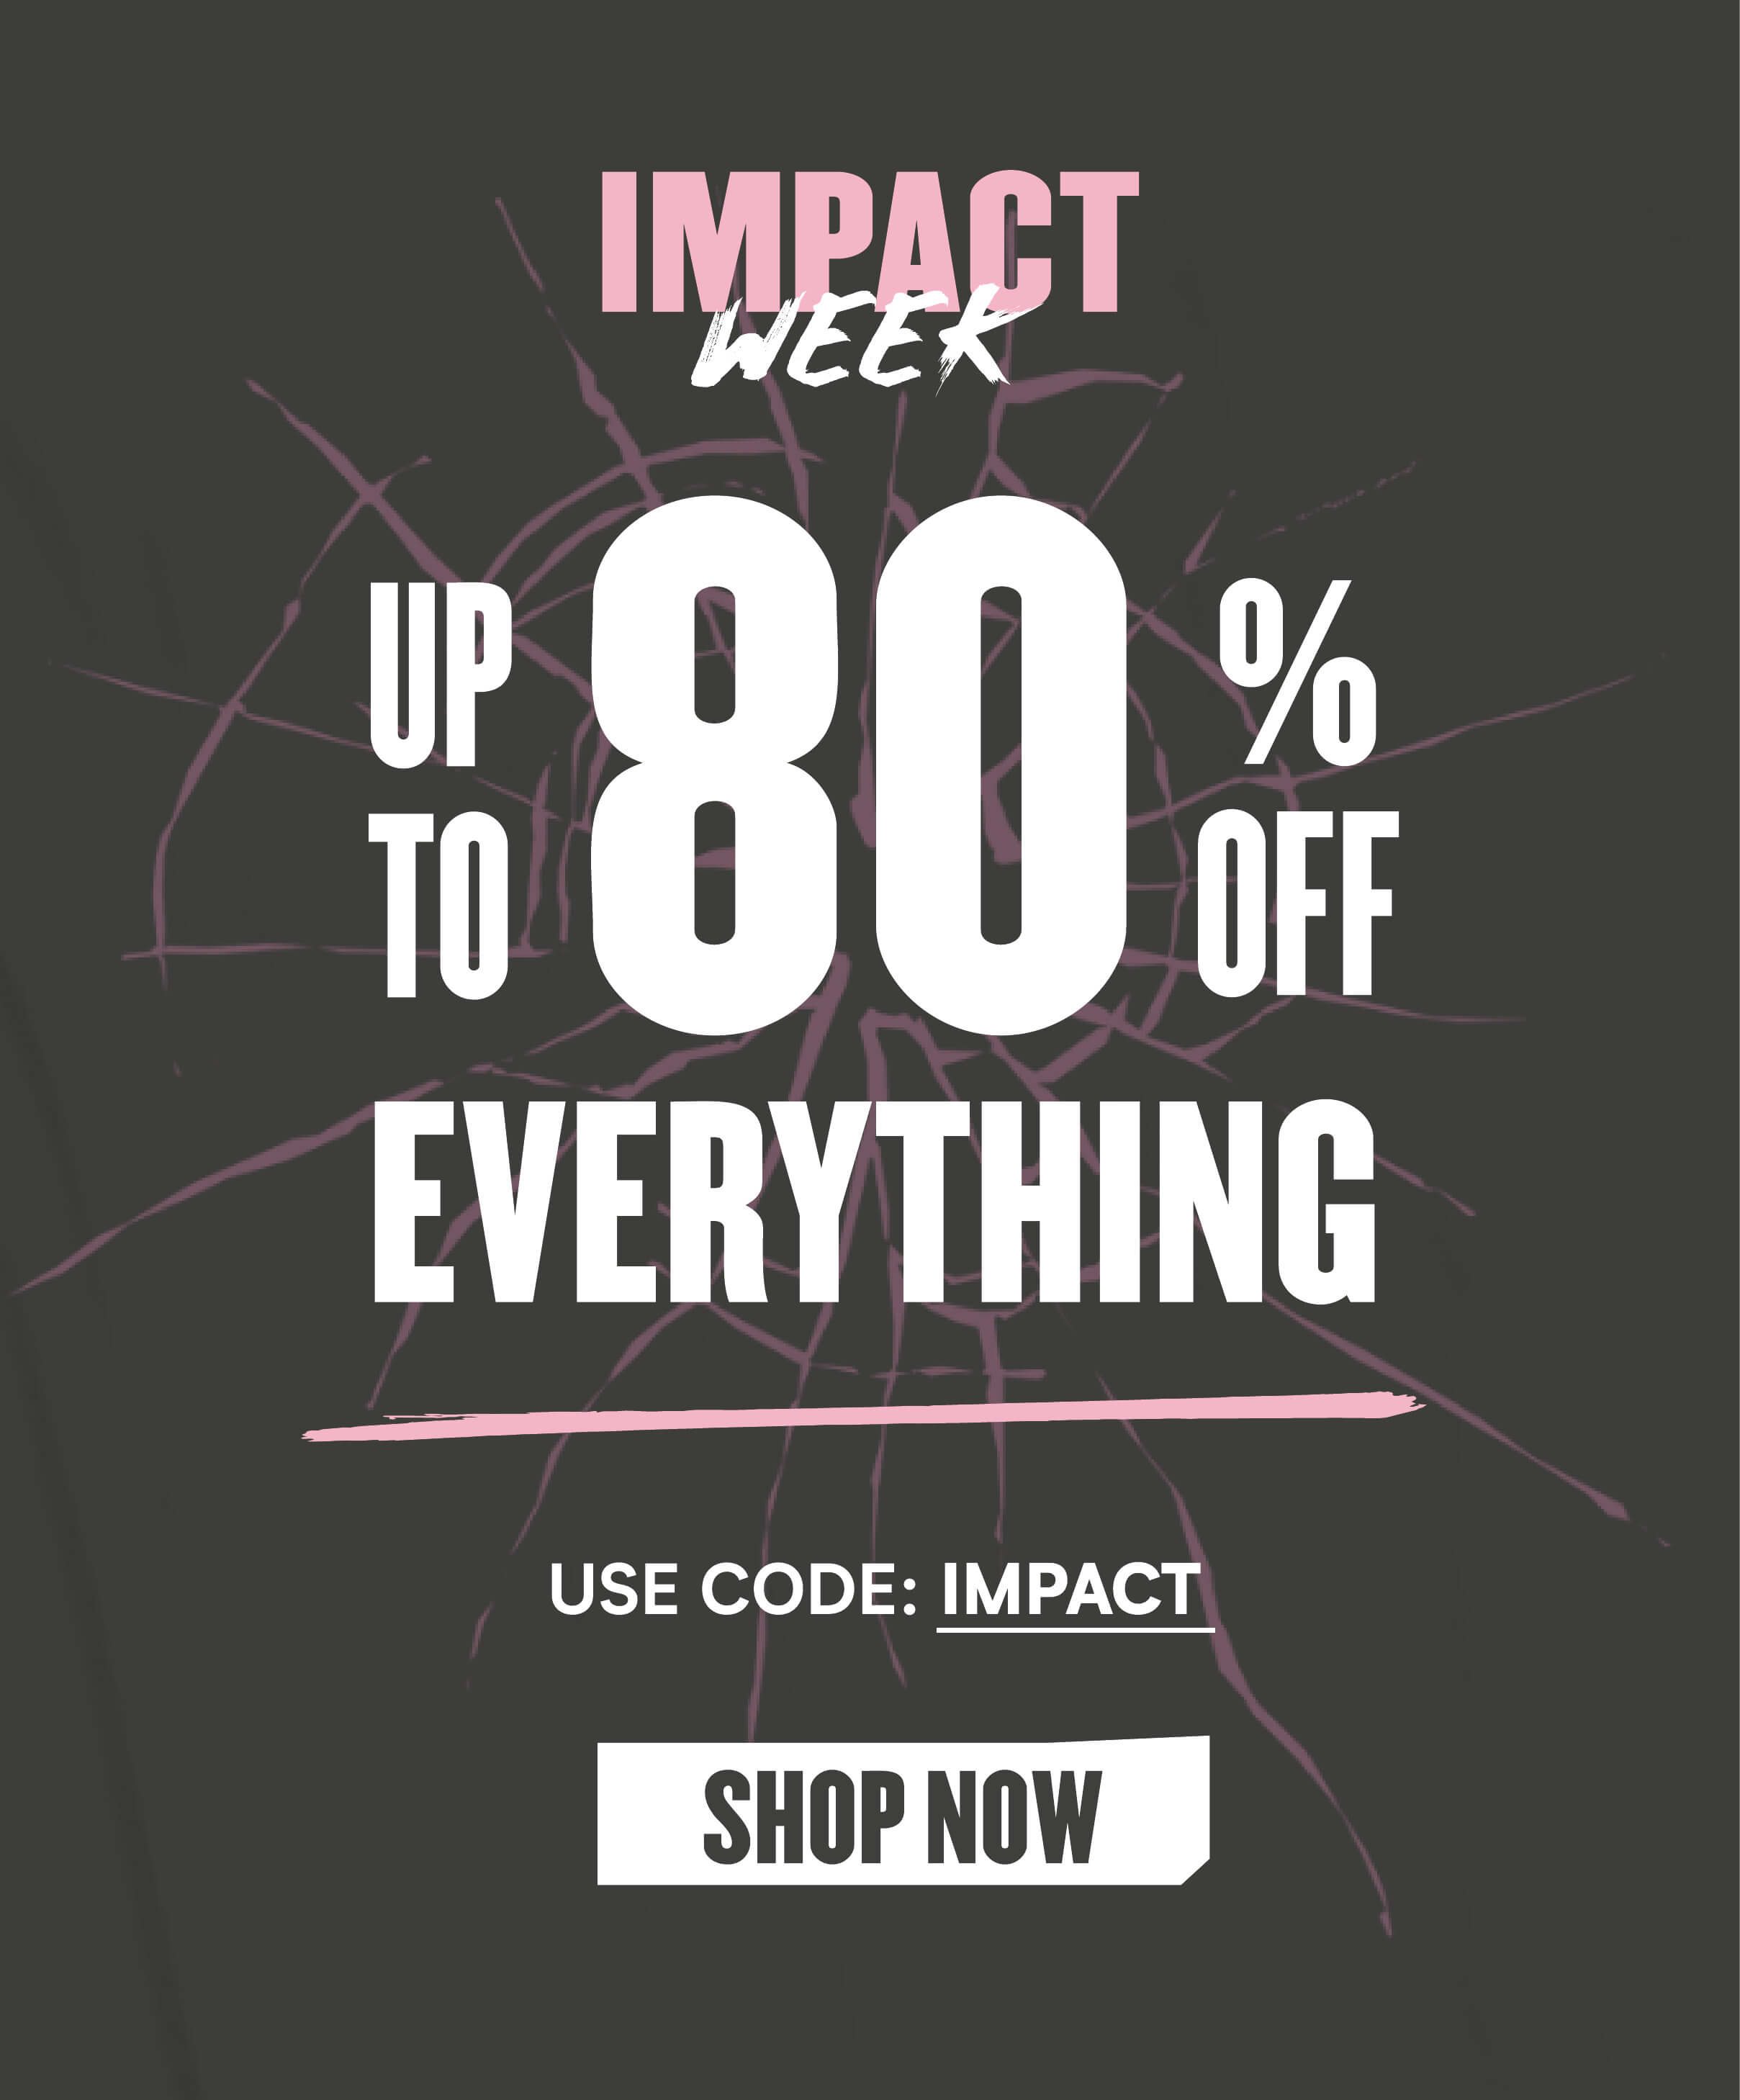 50% off almost everything